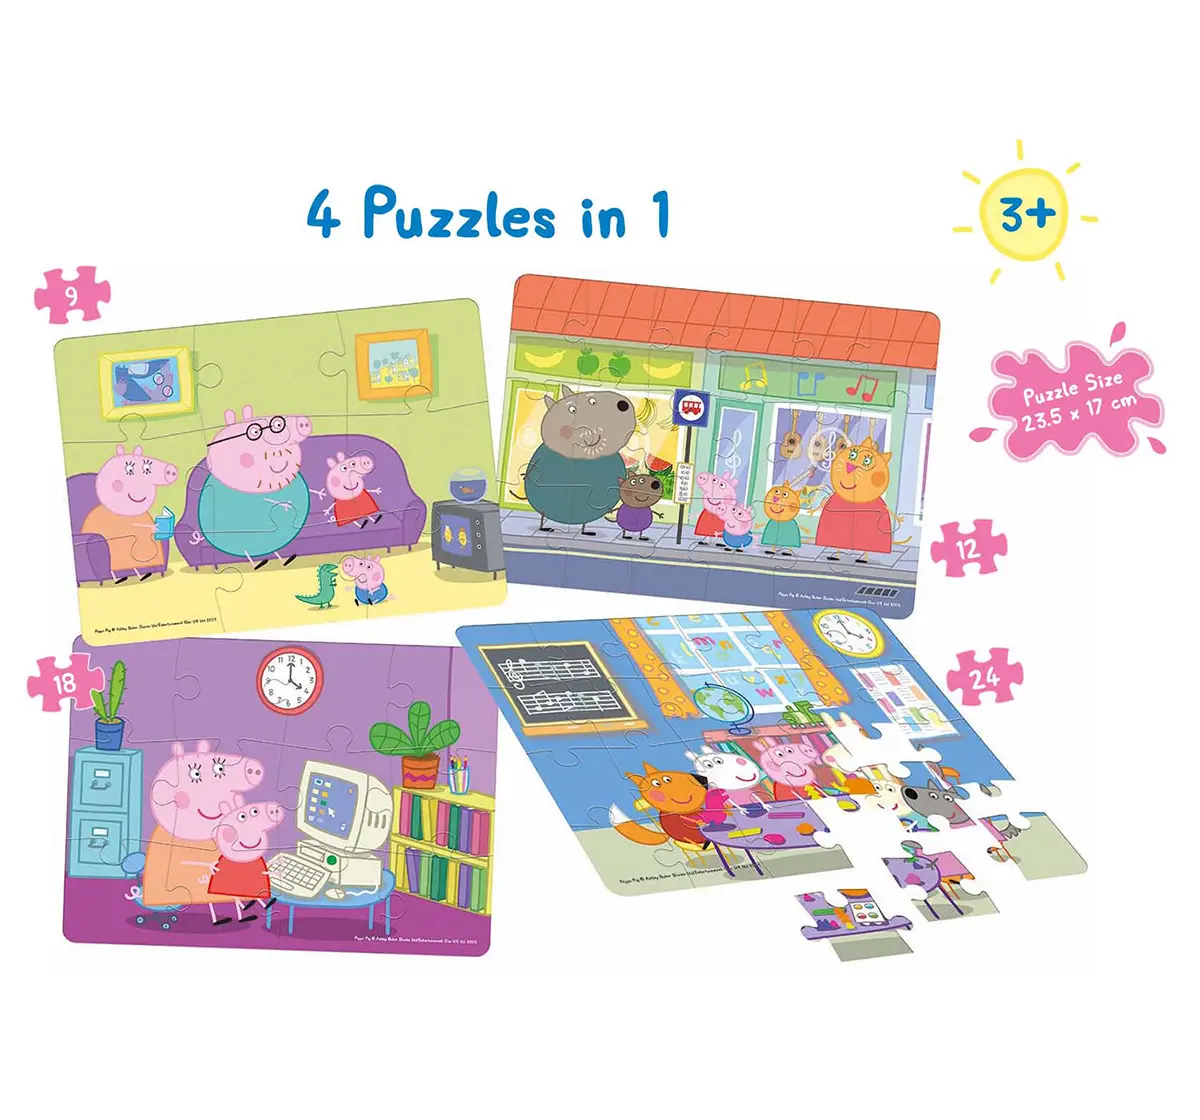 Frank Peppa Pig 4 In 1 Puzzle  for Kids age 3Y+ 